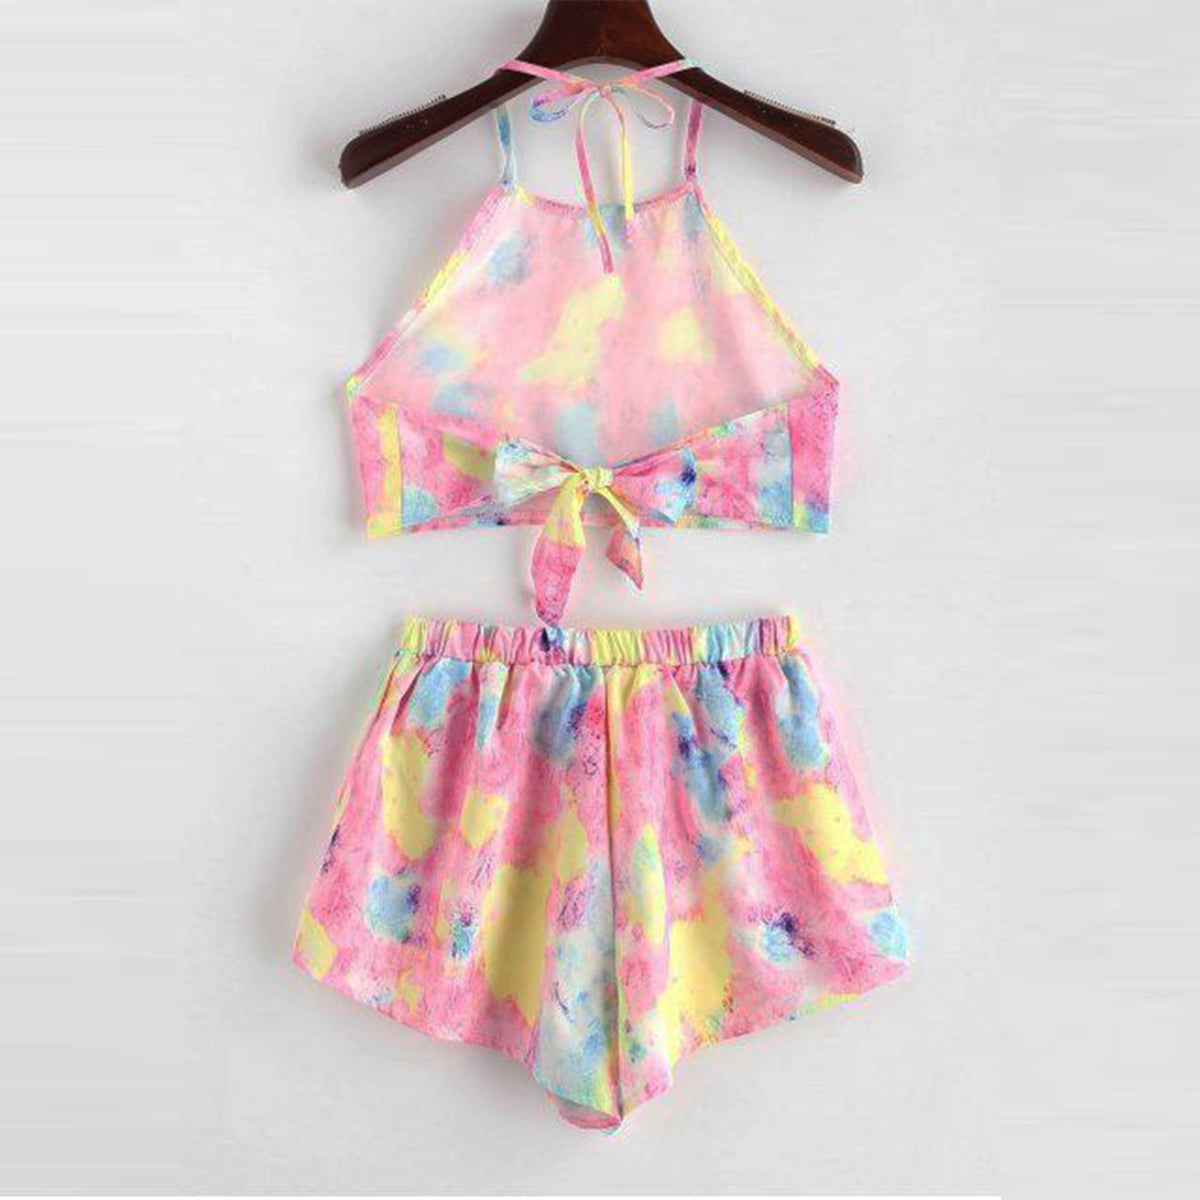 Unique Rainbow Design Crop Top Sleeveless And Shorts For Kids.